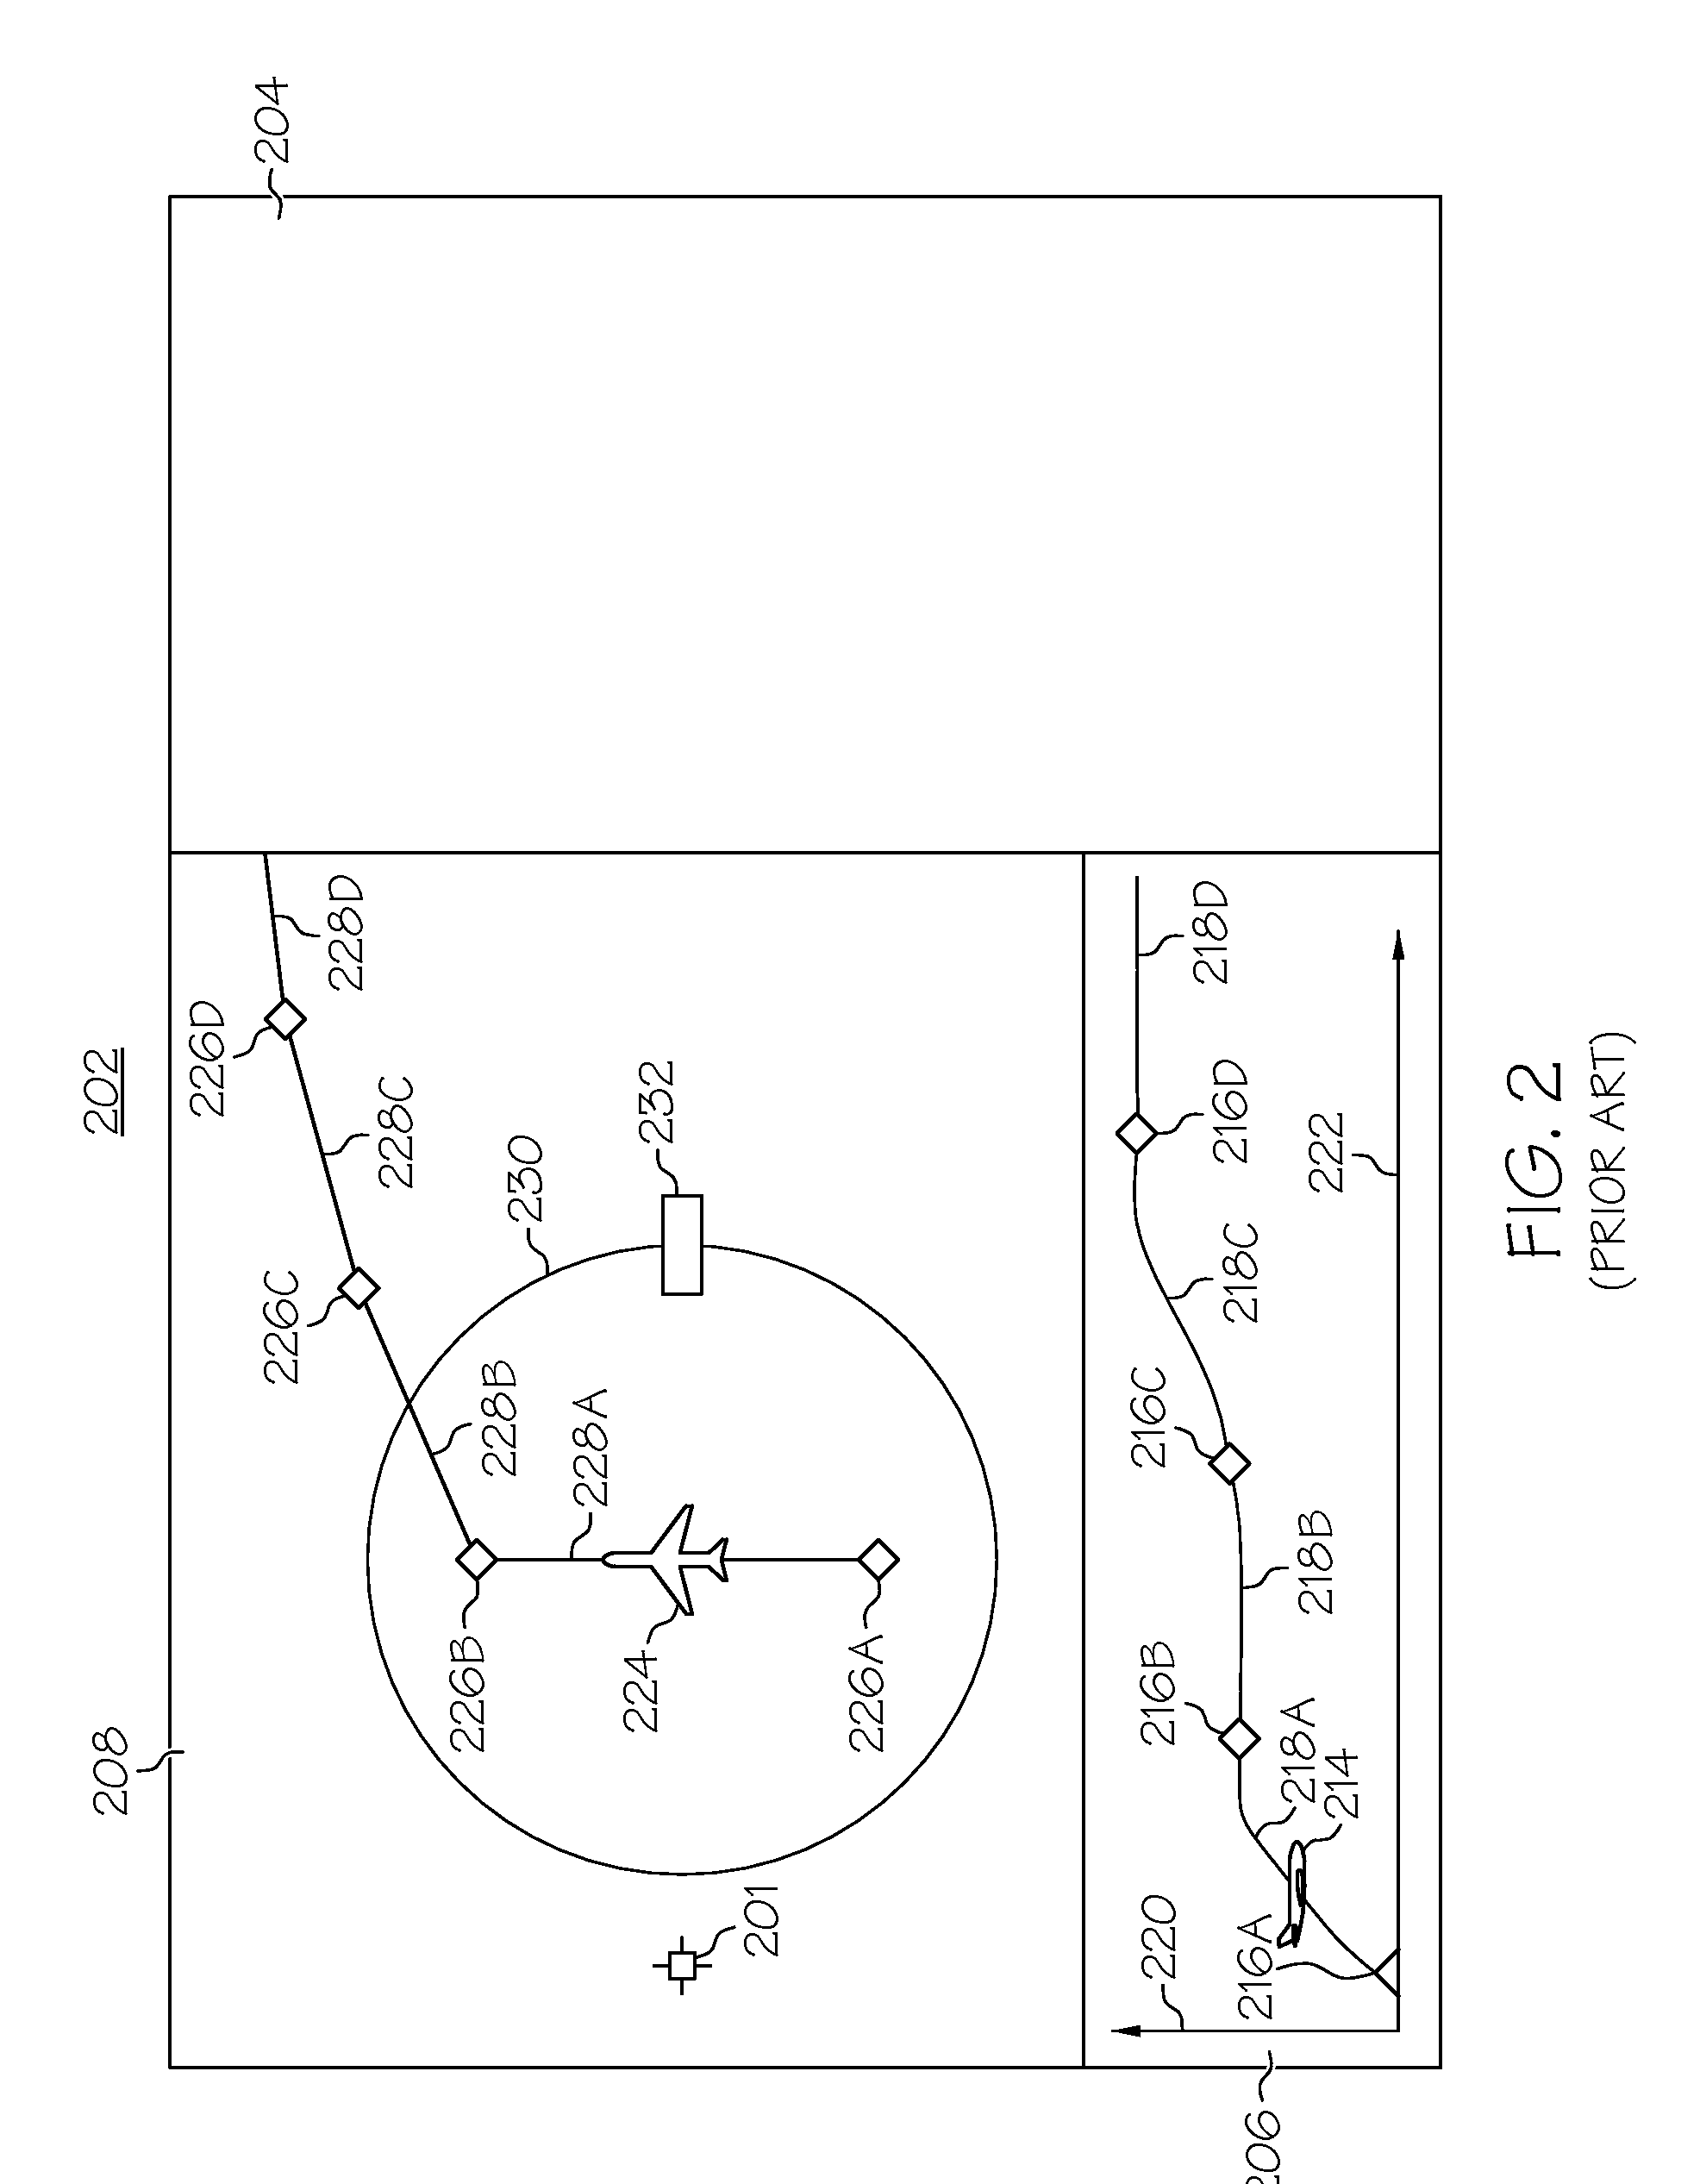 Flight deck communication and display system